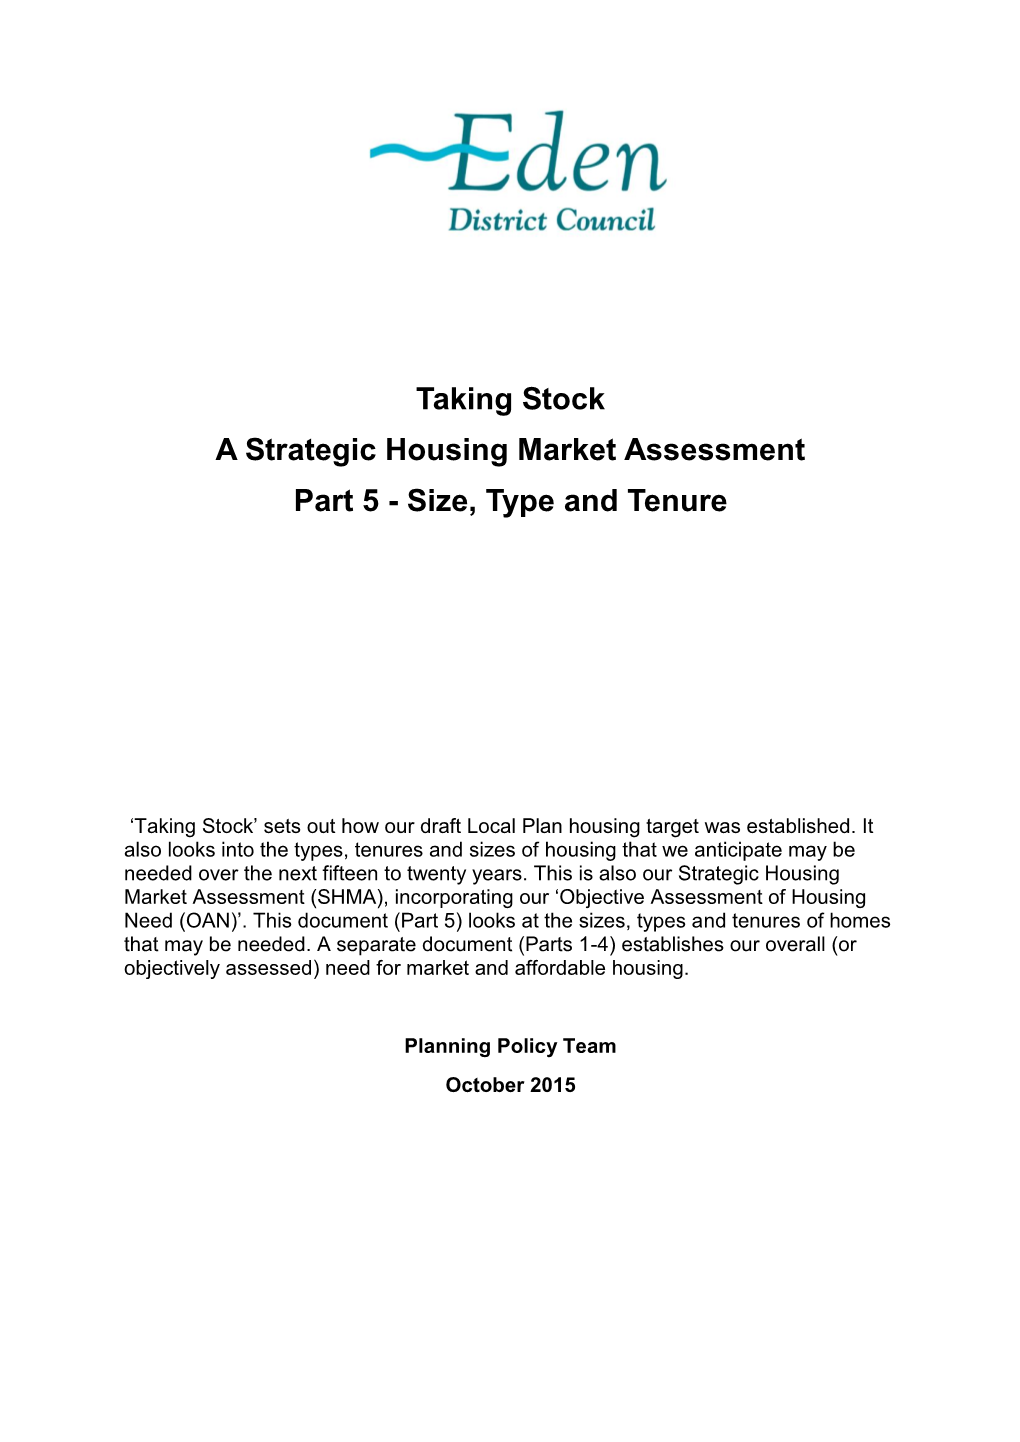 Taking Stock a Strategic Housing Market Assessment Part 5 - Size, Type and Tenure